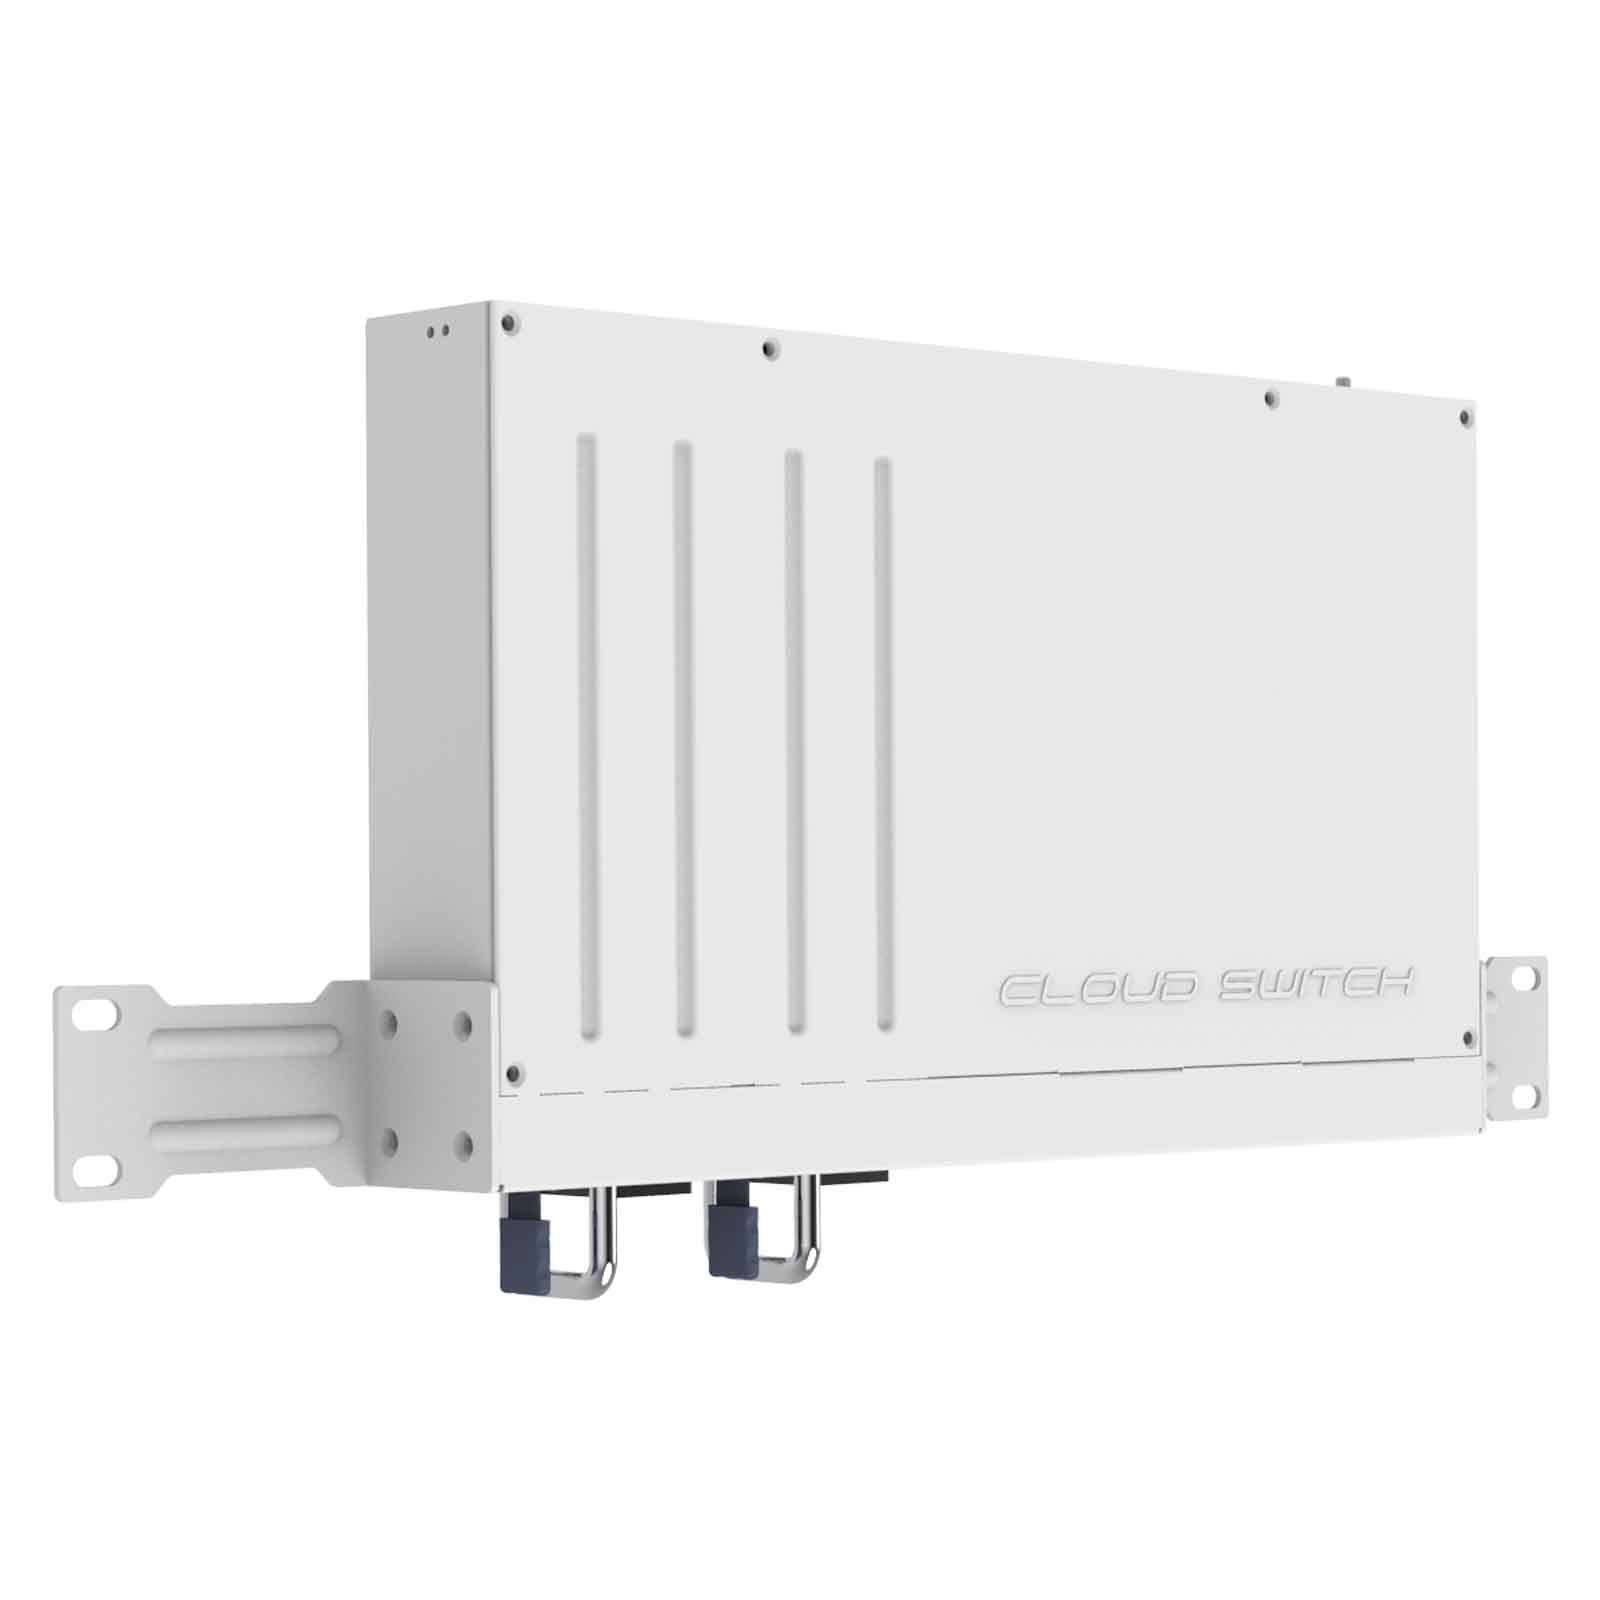 MikroTik Cloud Router Switch CRS504-4XQ-IN